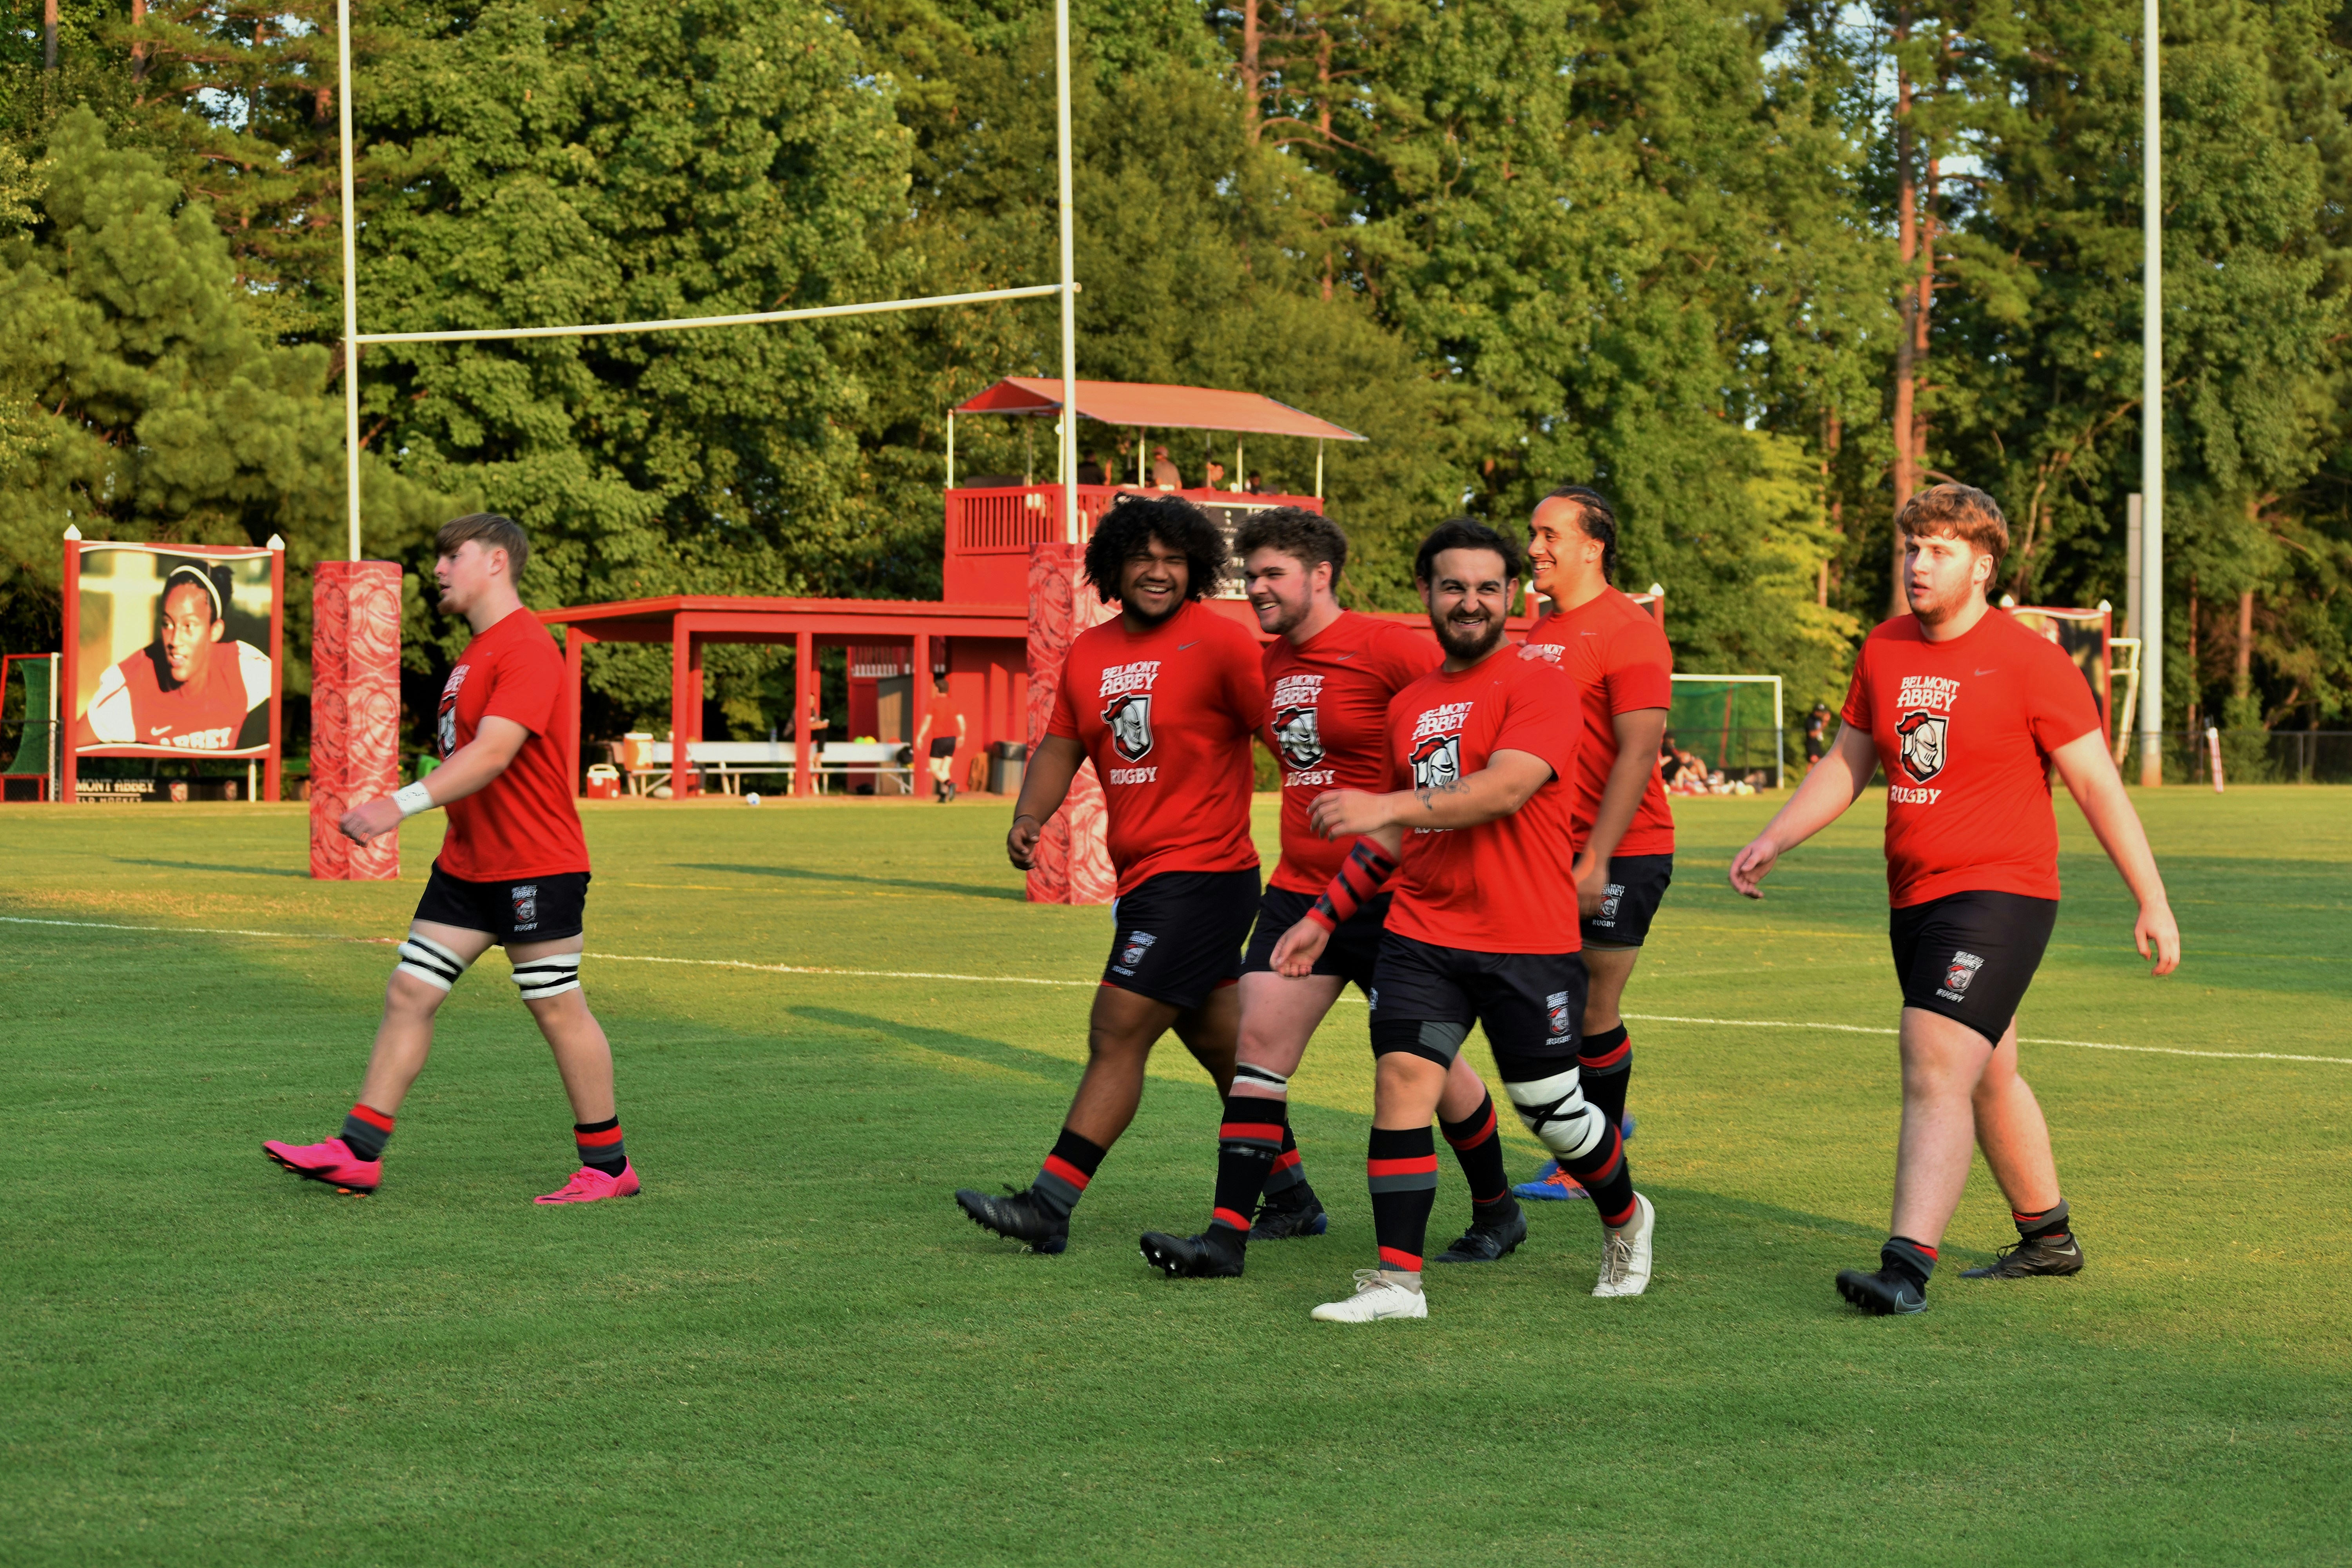 A group of laughing rugby players make their way to the locker rooms before a game starts after warming up.